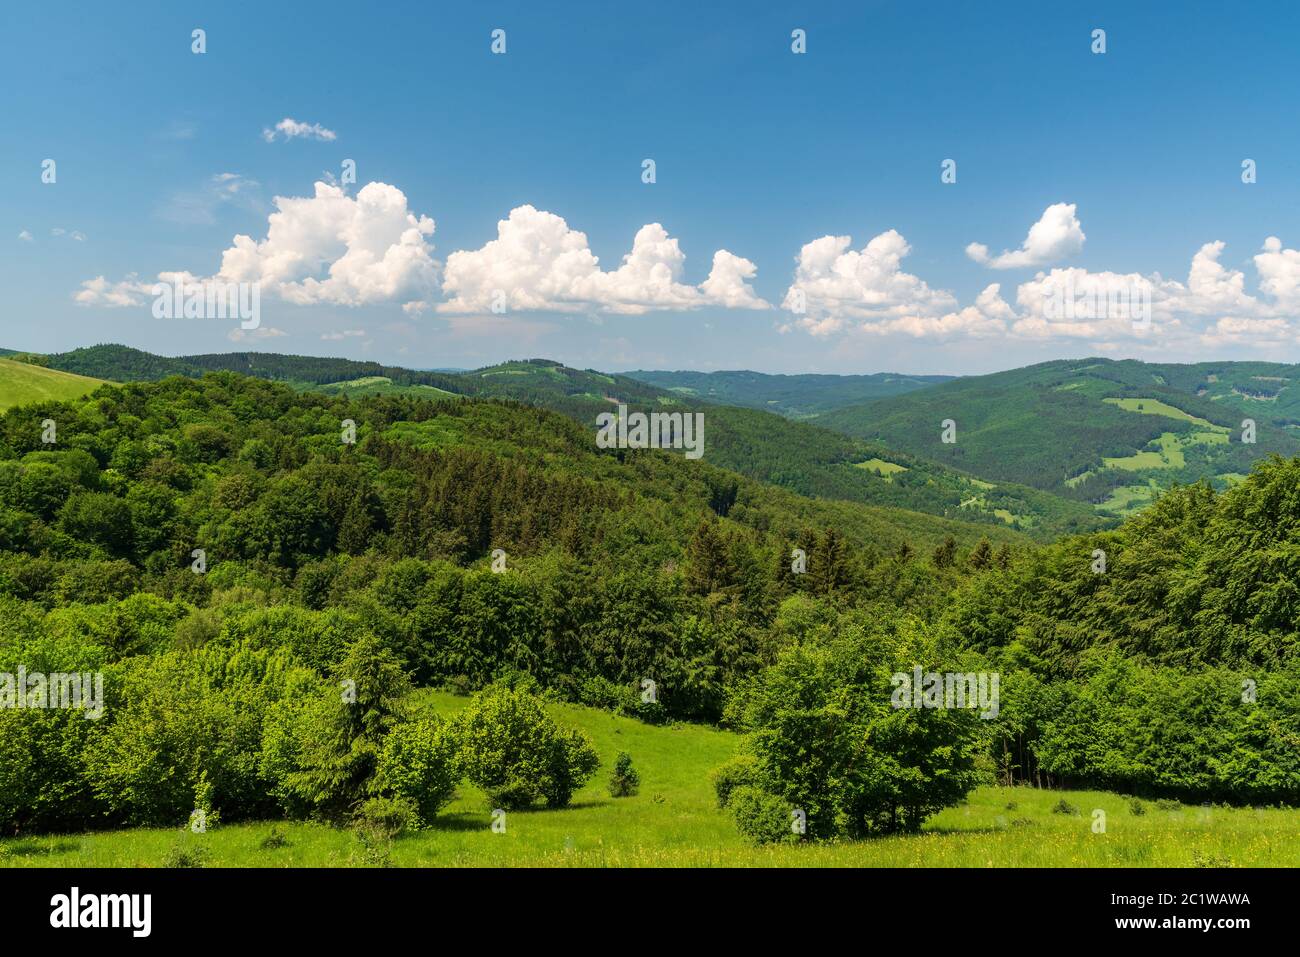 Beautiful Biele Karpaty mountains near Vrsatske Podhradie vollage on czech-slovakian borders with hills covered by mix of meadows and forest during sp Stock Photo